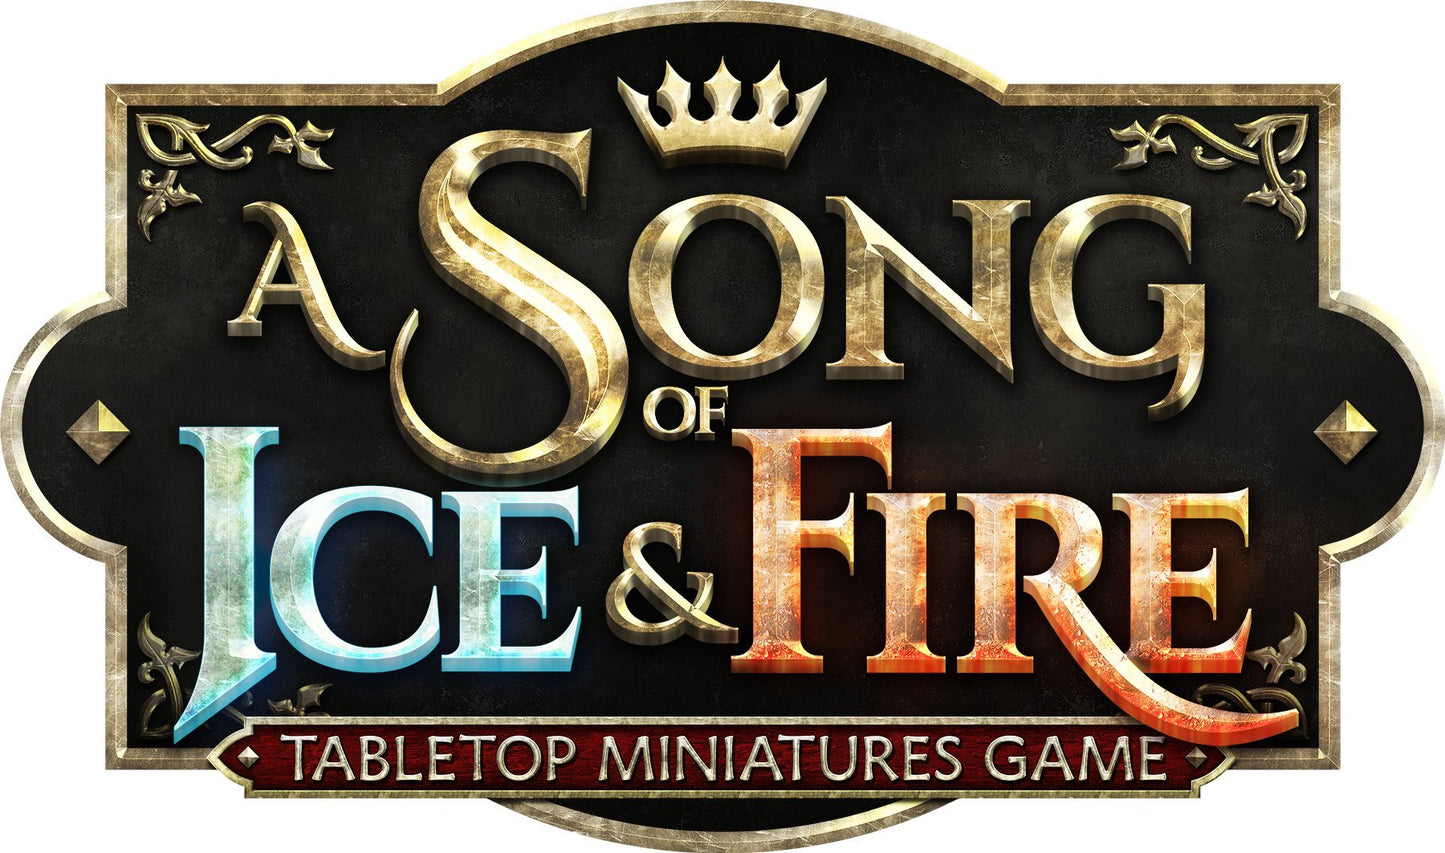 A Song of Ice and Fire - Lannister Guards - Strategy Game for Teens and Adults - Ages 14+ - 2+ Players - Average Playtime 45-60 Minutes - Made by Cmon